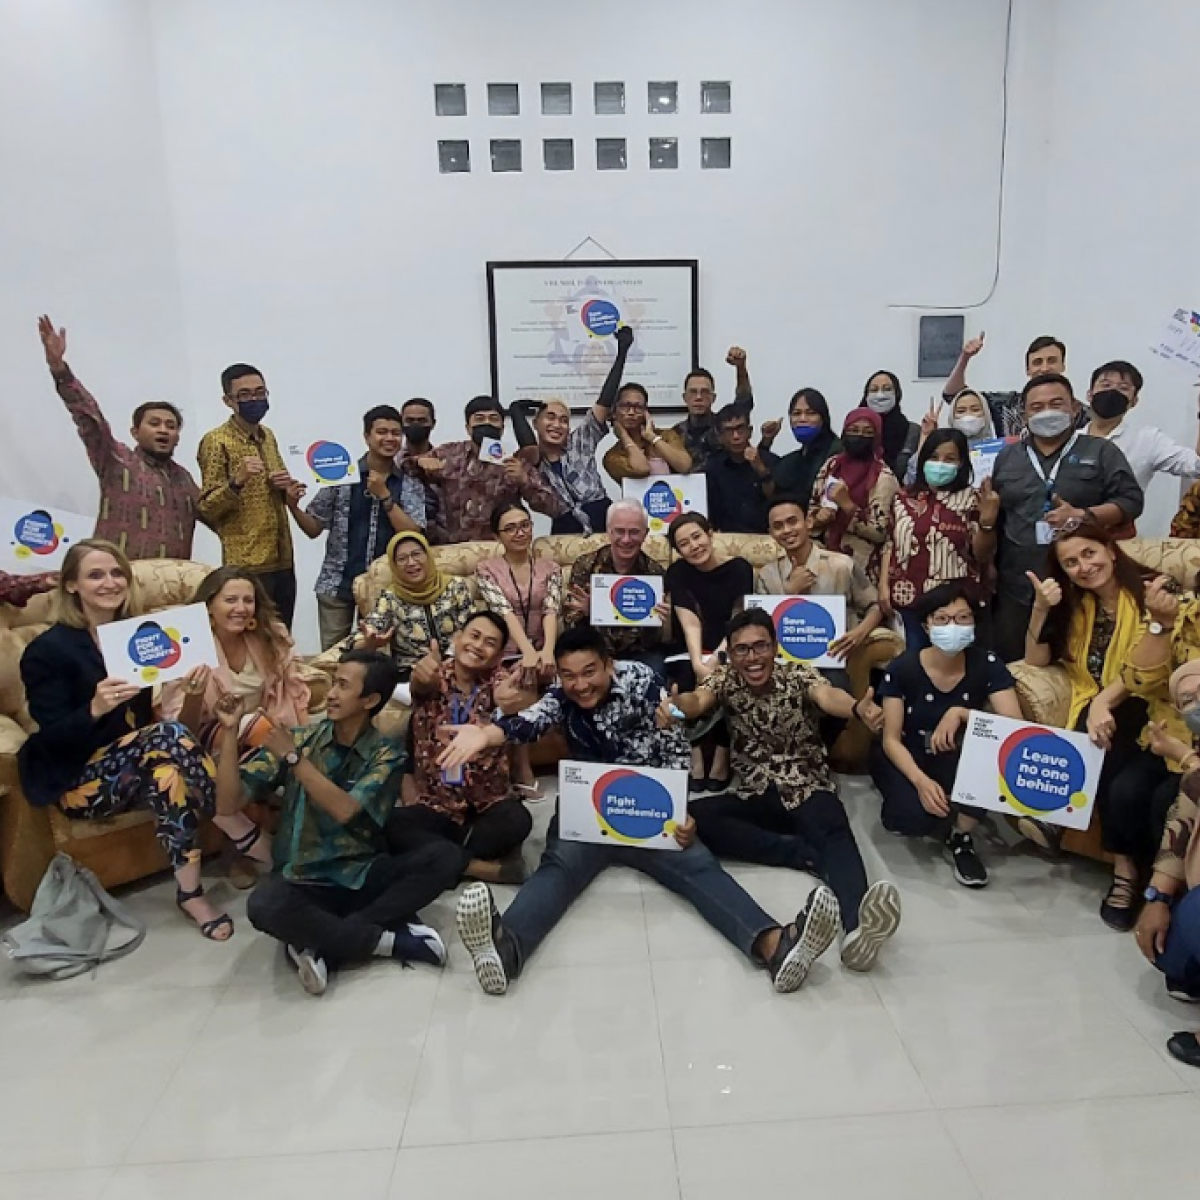 Peter Sands, CEO of the Global Fund, met with representatives of key populations in Jakarta, at Jaringan Indonesia Positif. They discussed everyday challenges fighting HIV and TB.